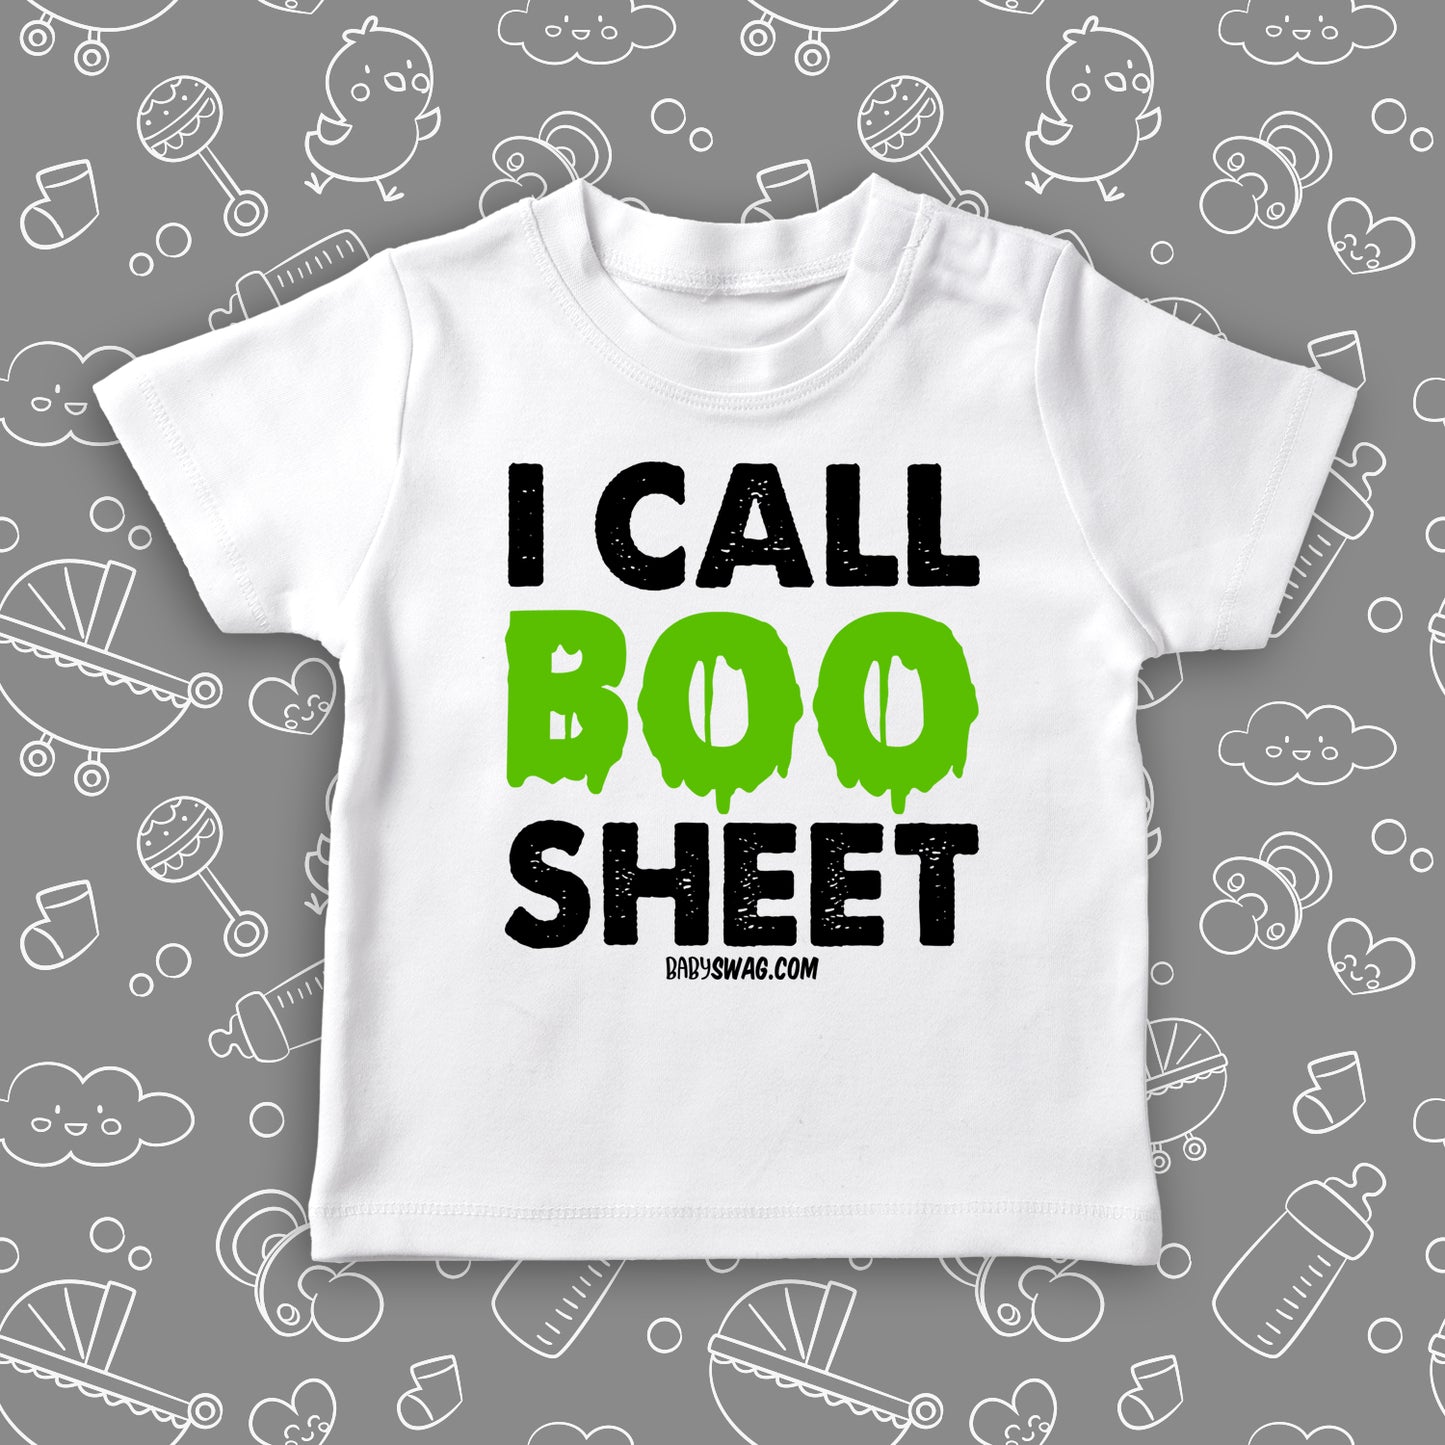 Funny toddler shirt with saying "I Call Boo Sheet" in white. 